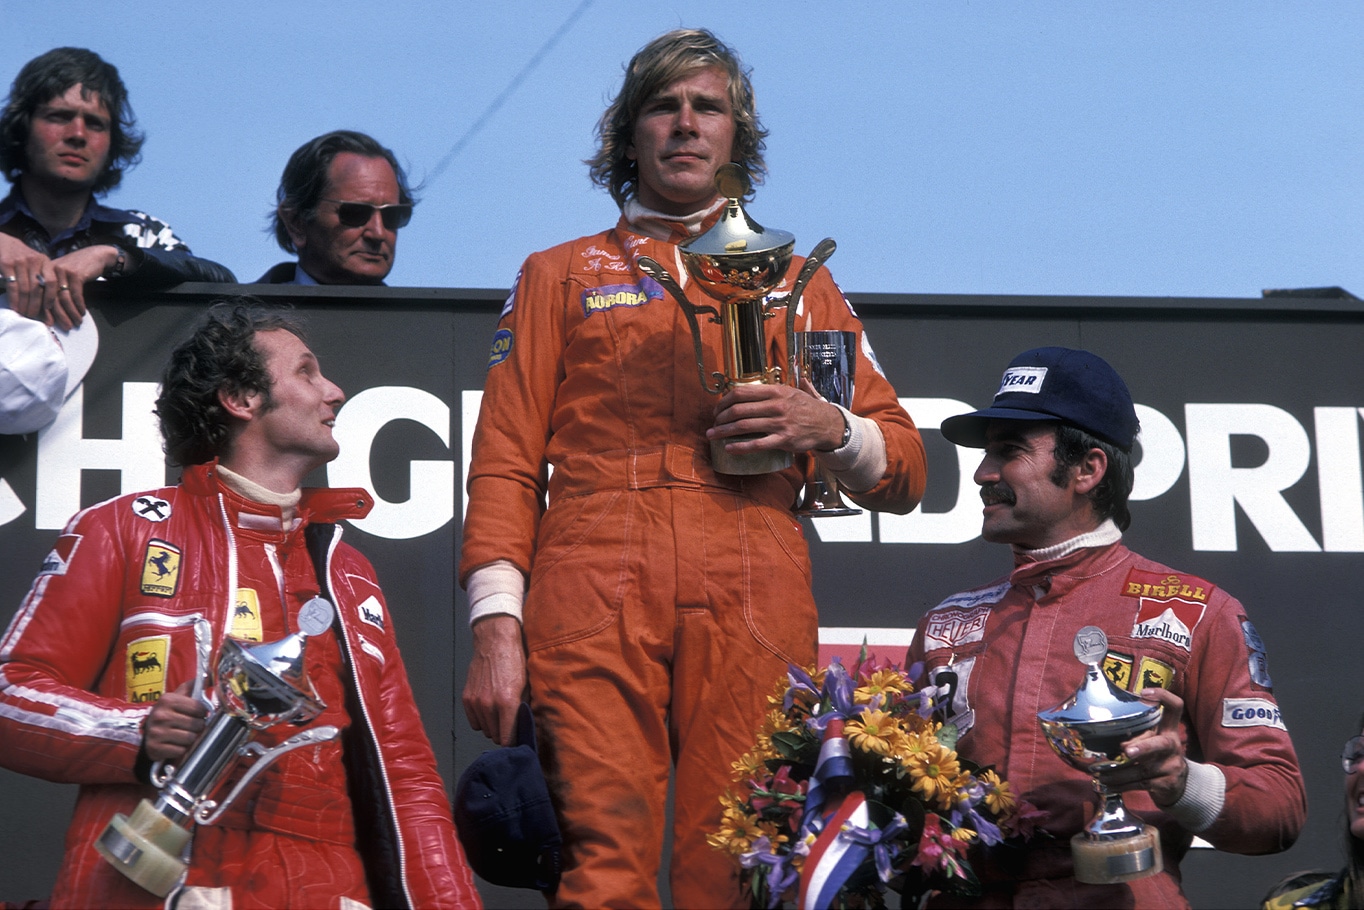 James Hunt on the top step of the podium for Hesketh Racing after winning the 1975 Dutch Grand Prix at Zandvoort